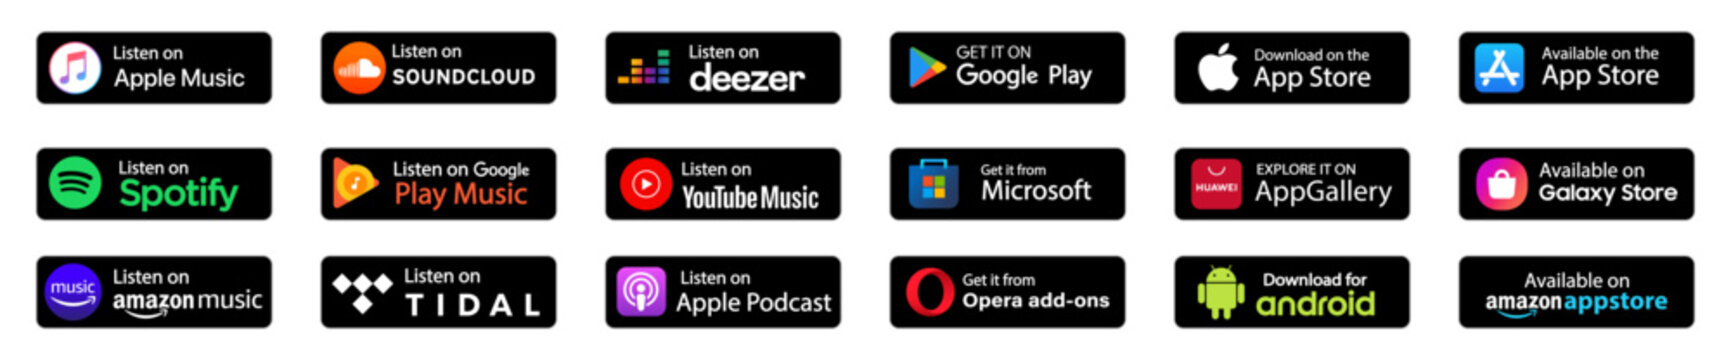 Popular music streaming services with listening badges.Music streaming platforms .Download Set of Badges from the app store.App store,google play,microsoft store,huawei store,amazone store.Vector